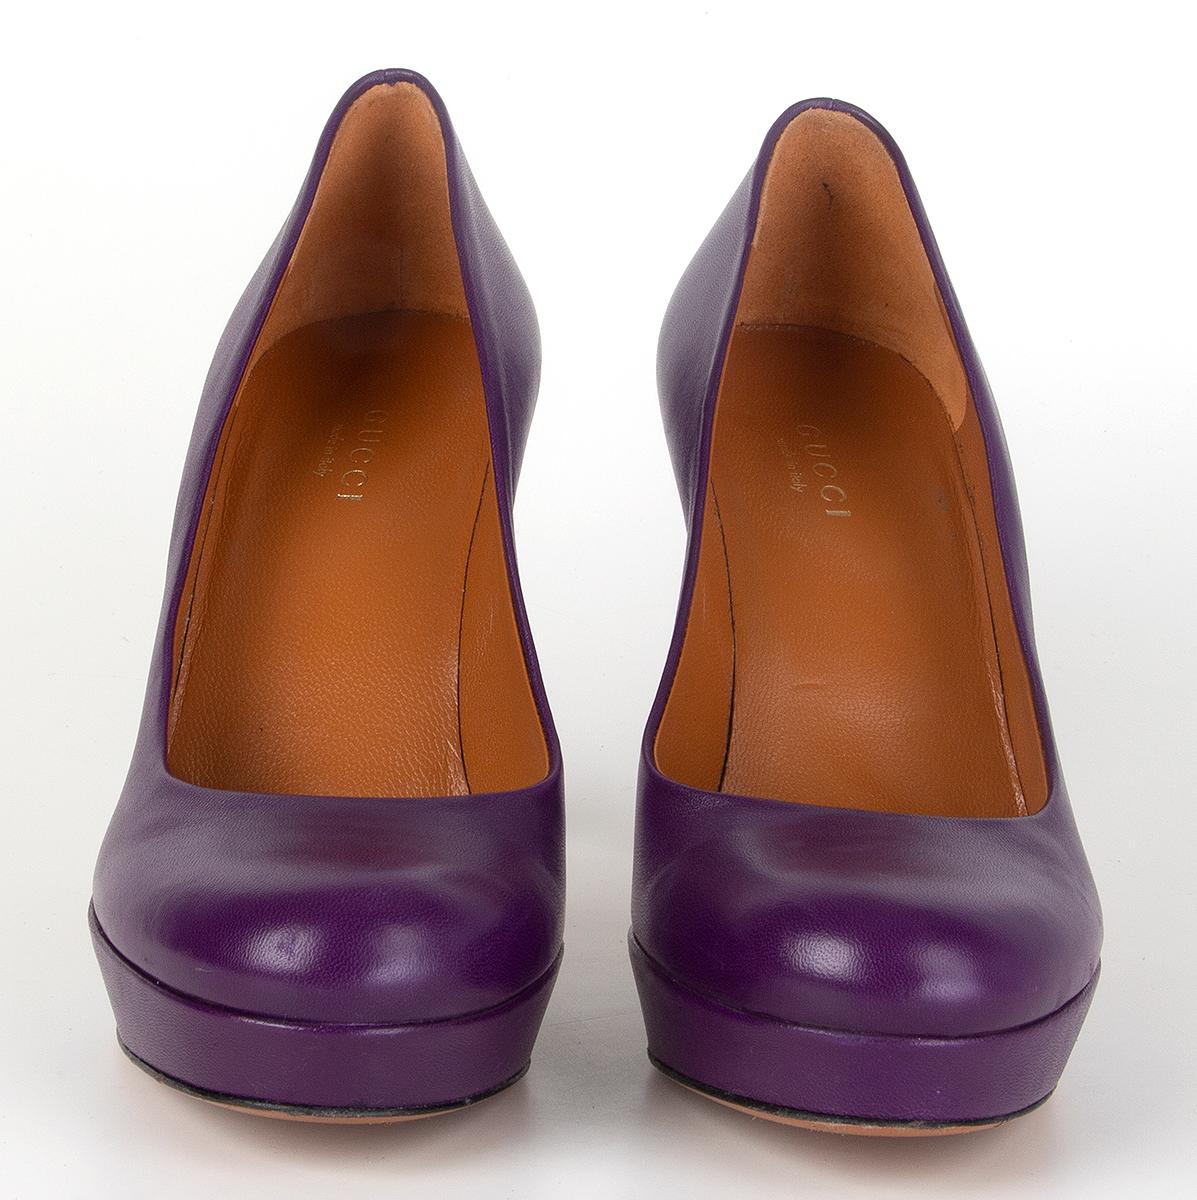 100% authentic Gucci round-toe platform pumps in purple calfskin. Have been worn and are in excellent condition. Come with dust bag. 

Measurements
Imprinted Size	35.5
Shoe Size	35.5
Inside Sole	23cm (9in)
Width	7cm (2.7in)
Heel	10cm